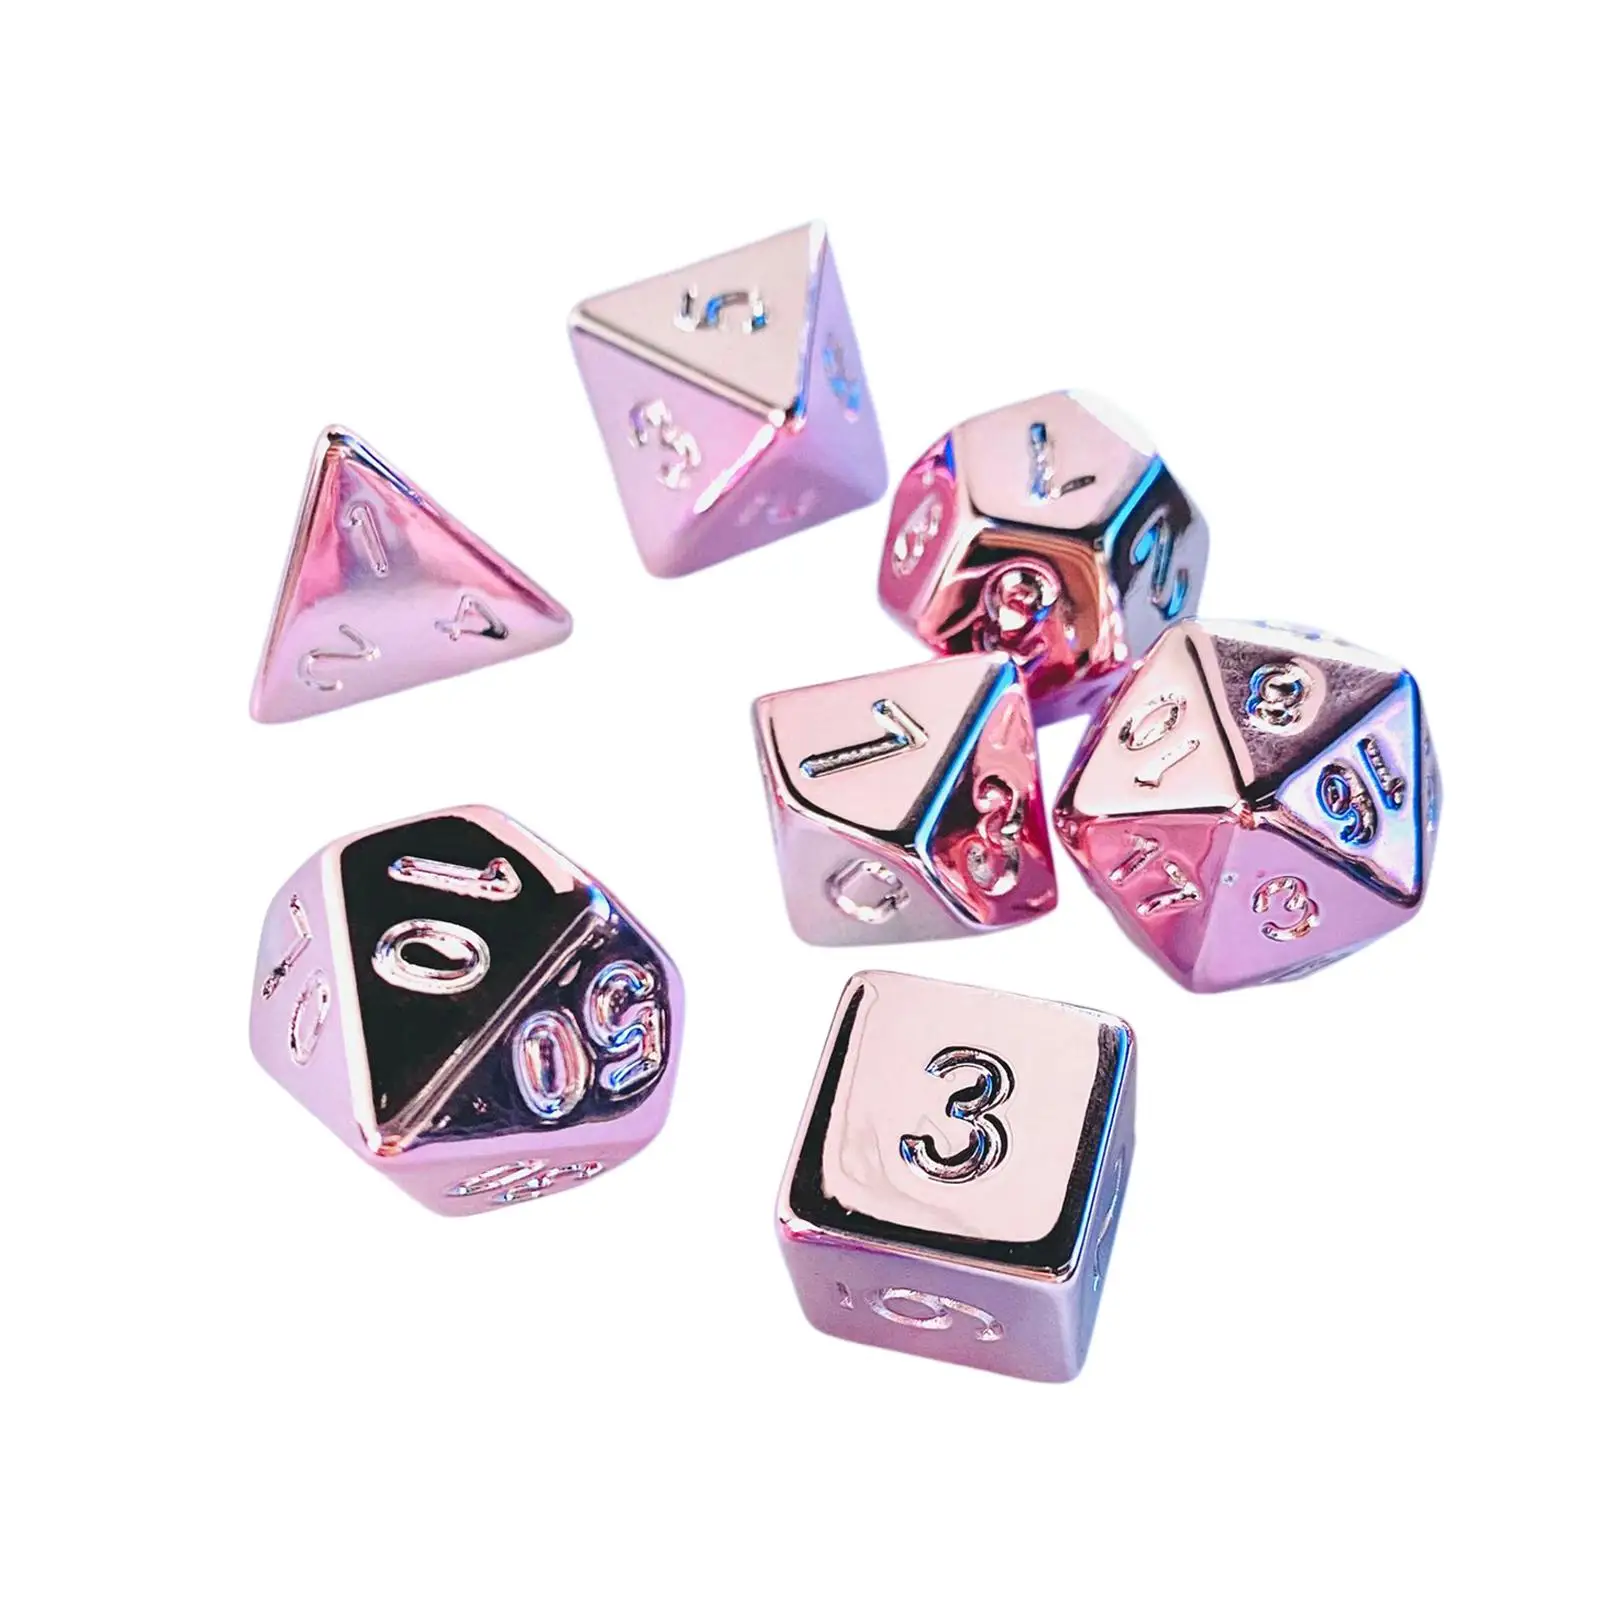 7x Polyhedral Dices D4-d20 Party Supplies Acrylic Dices for Table Game Role Playing Game Board Game Card Games Party Game